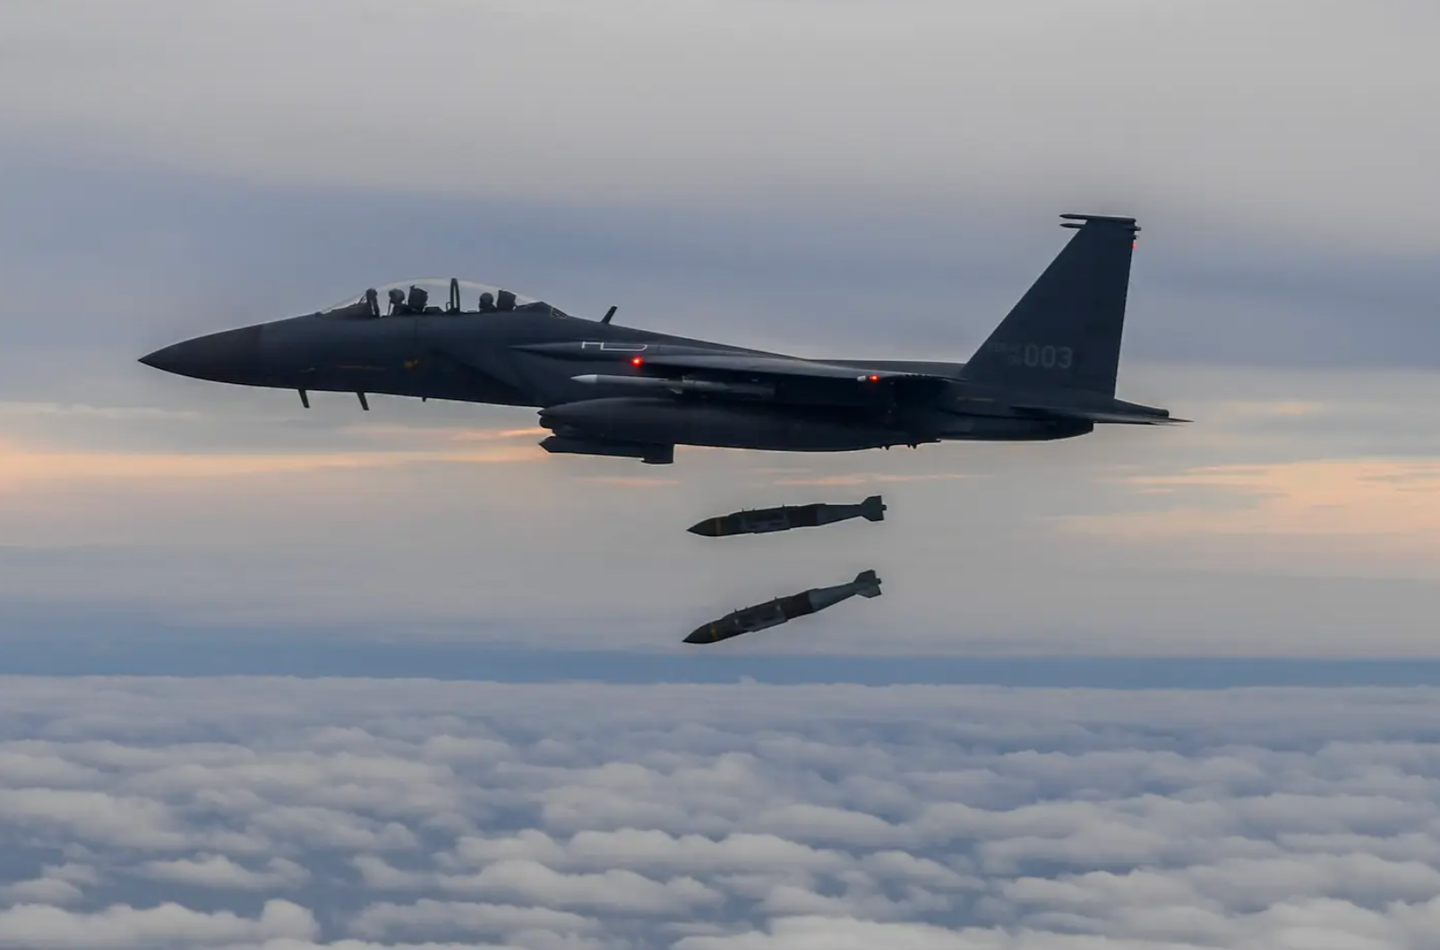 A photo released by the South Korean Defense Ministry shows a ROKAF F-15K dropping two Joint Direct Attack Munition (JDAM) bombs onto an island target in response to a North Korean IRBM launch, on October 4, 2022.&nbsp;<em>Photo by South Korean Defense Ministry via Getty Images</em>